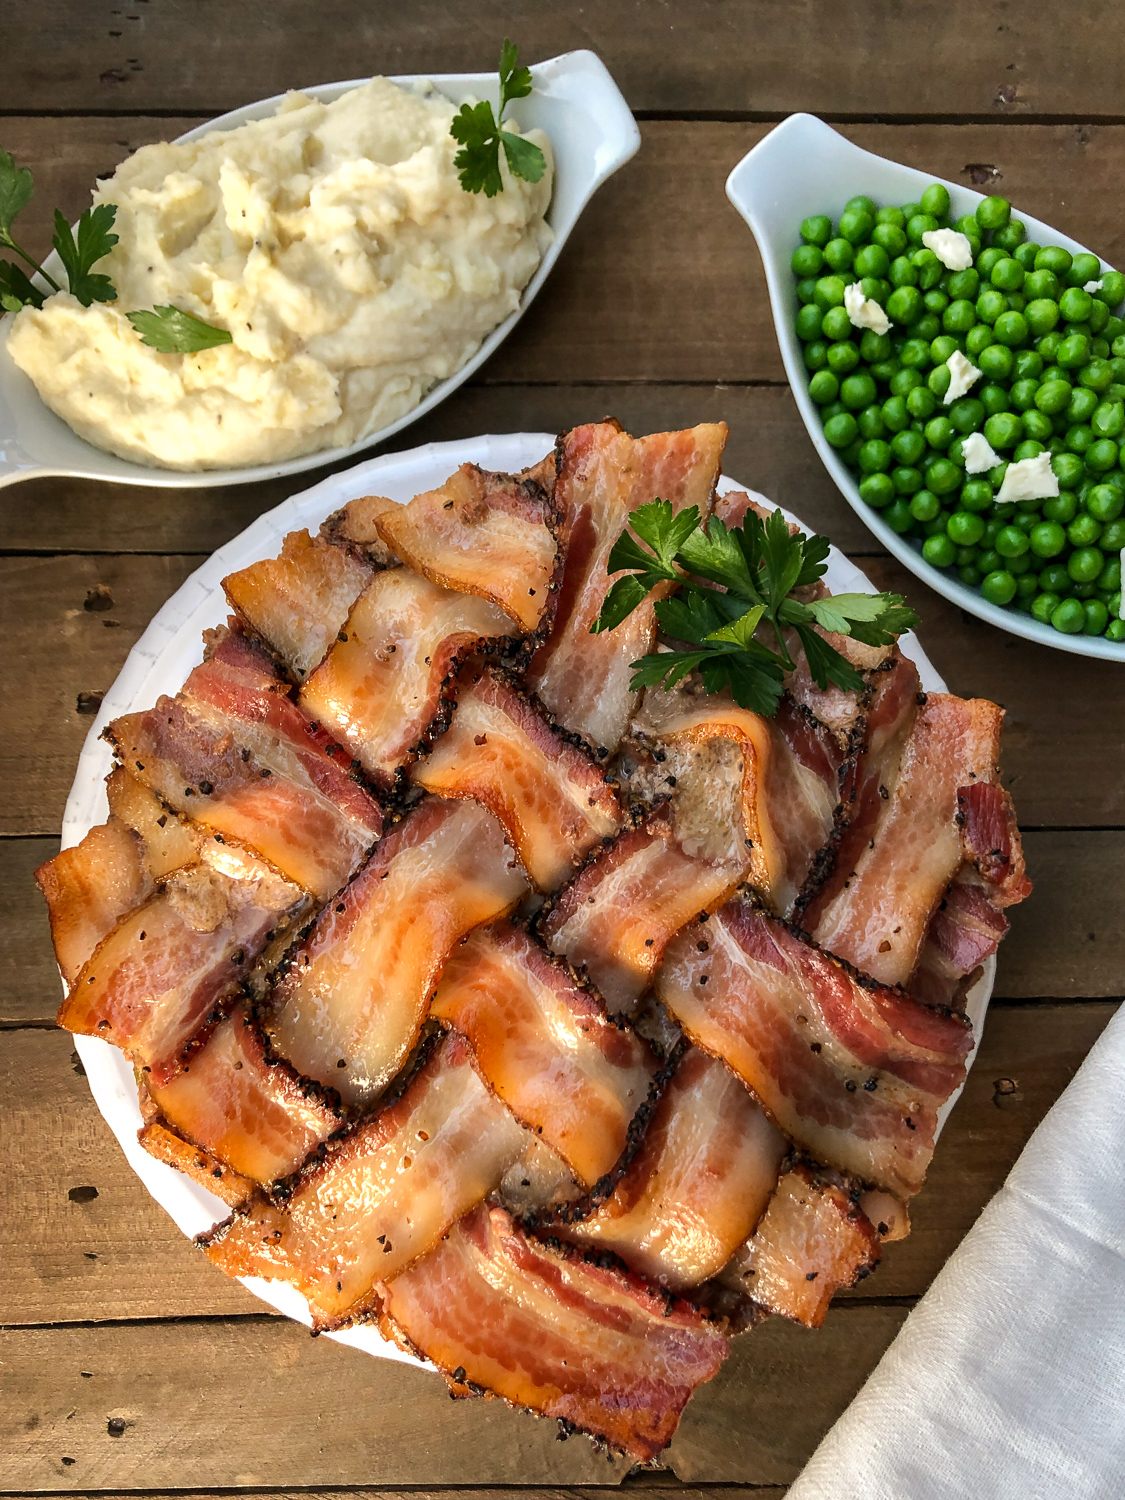 Peppered bacon meatloaf garnished with fresh parsley served with mashed potatoes and green beans. 